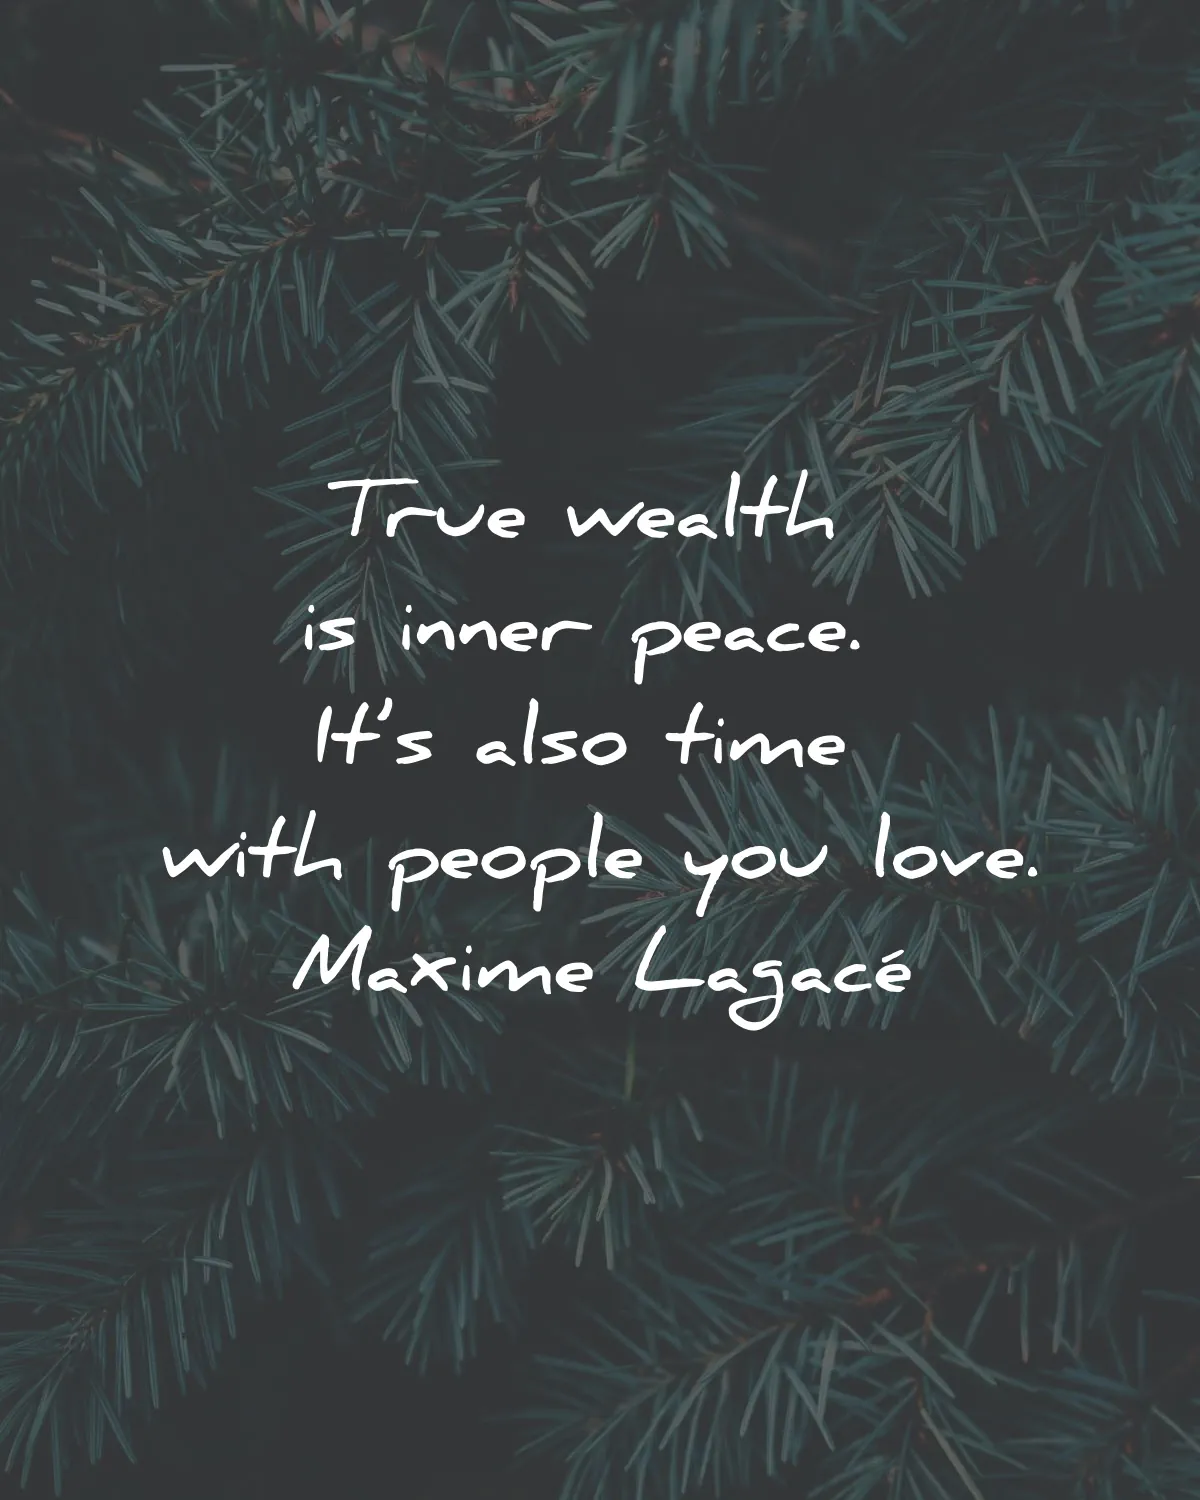 christmas quotes true wealth inner peace time people love maxime lagace wisdom